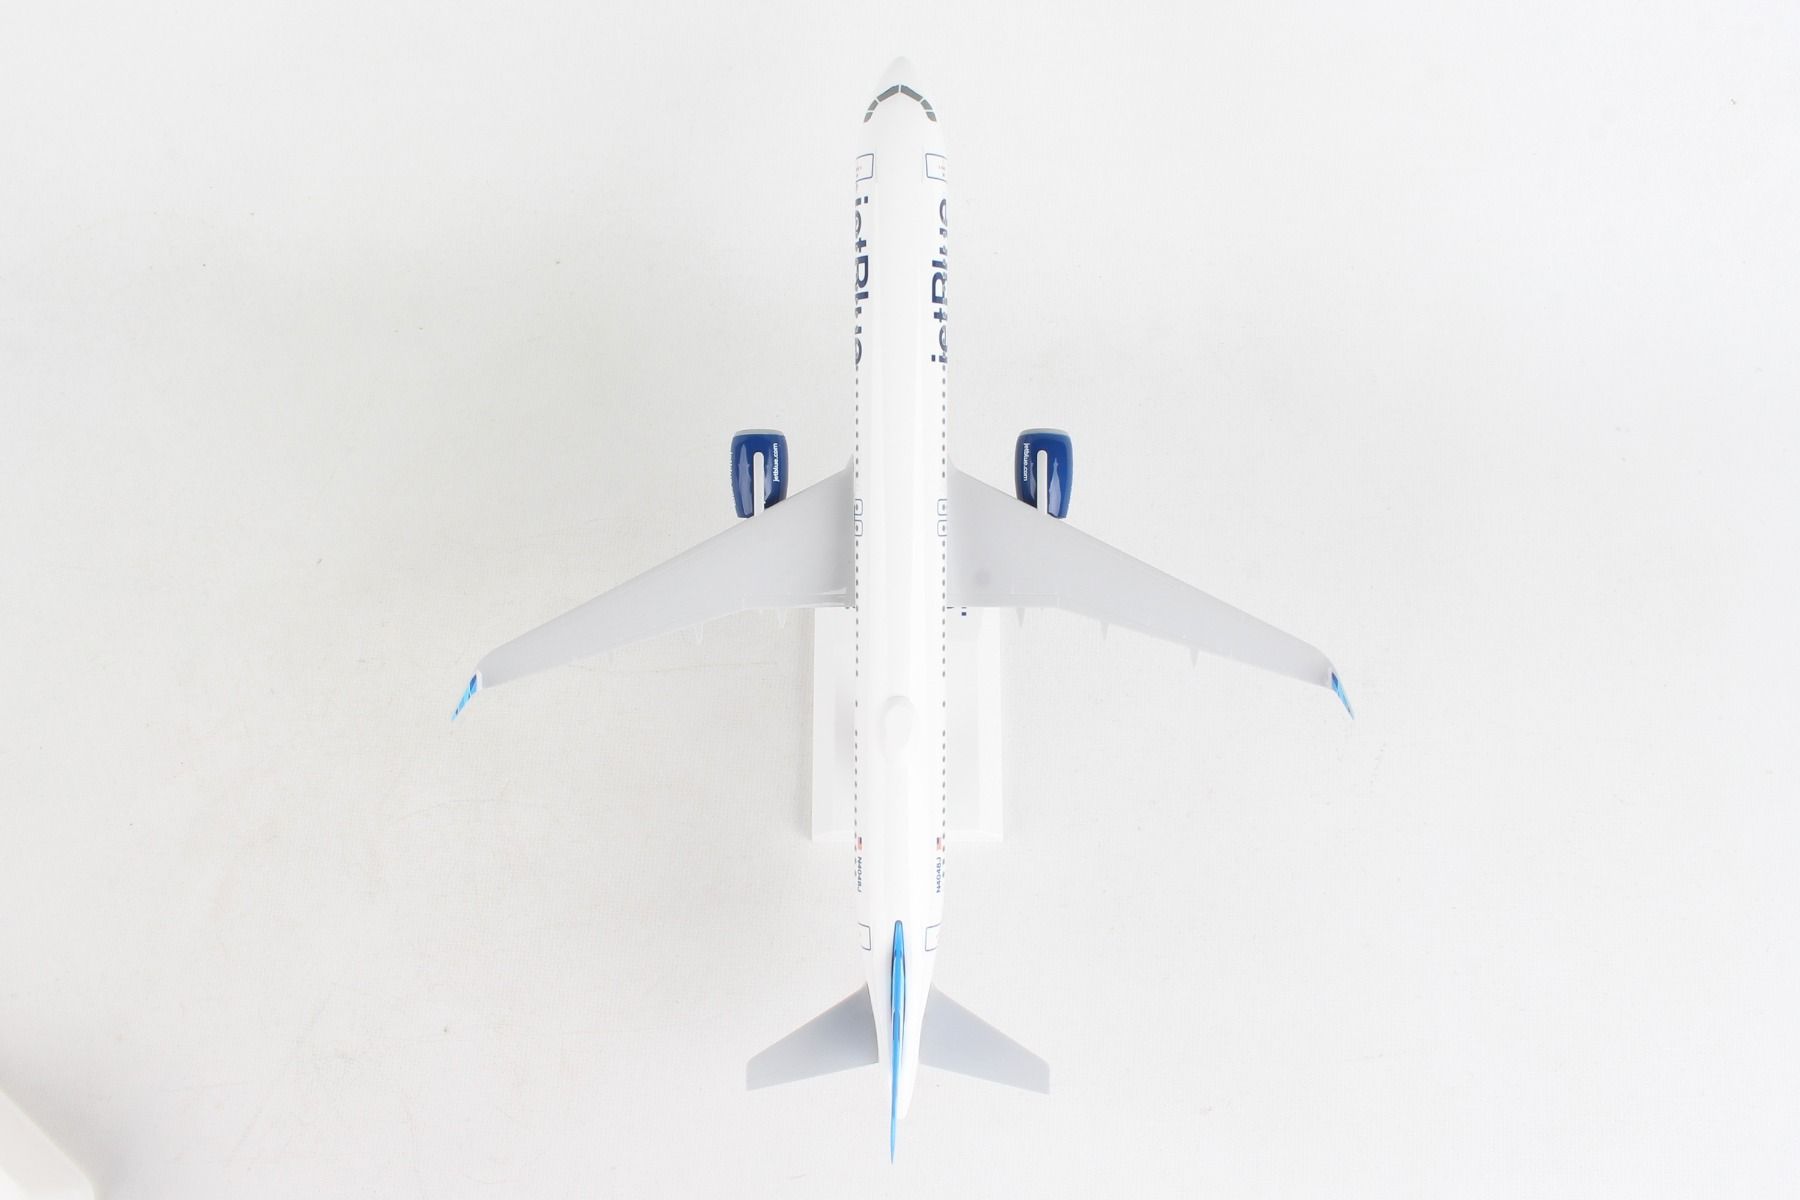 SKY MARKS # SKR778 JET BLUE AIRBUS A321-1/150 SCALE 